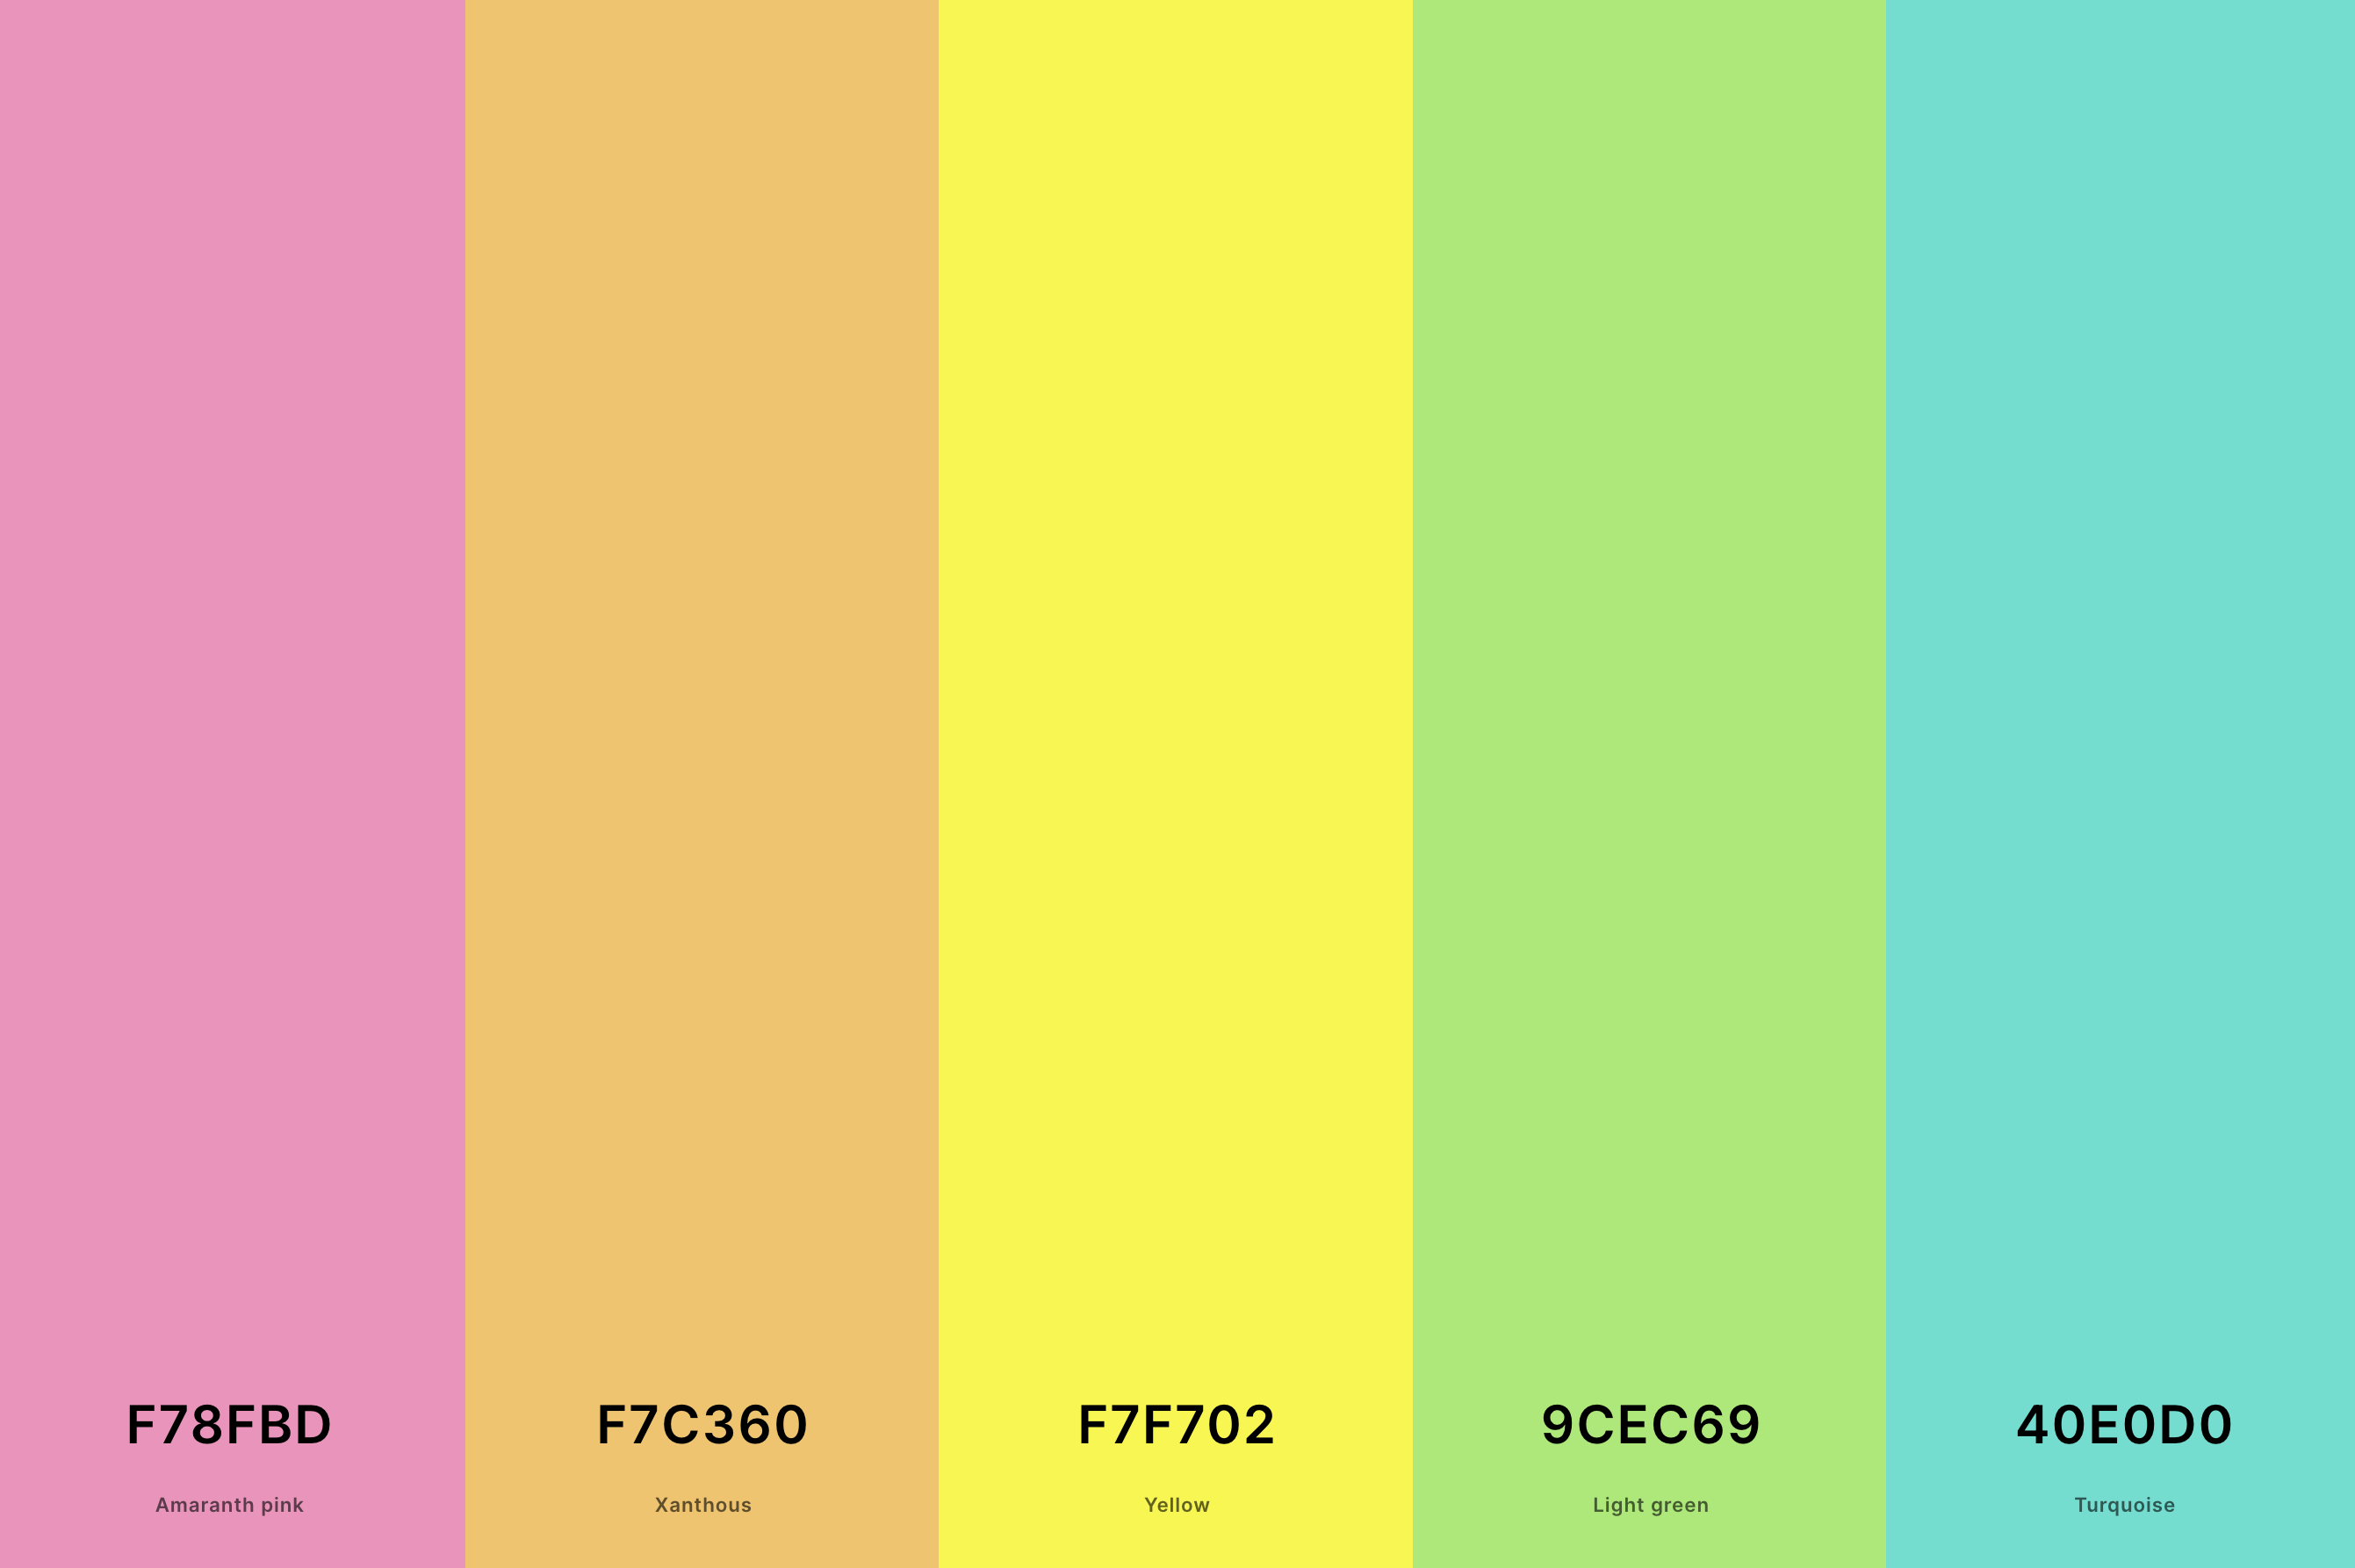 18. Pink, Yellow And Turquoise Color Palette Color Palette with Amaranth Pink (Hex #F78FBD) + Xanthous (Hex #F7C360) + Yellow (Hex #F7F702) + Light Green (Hex #9CEC69) + Turquoise (Hex #40E0D0) Color Palette with Hex Codes